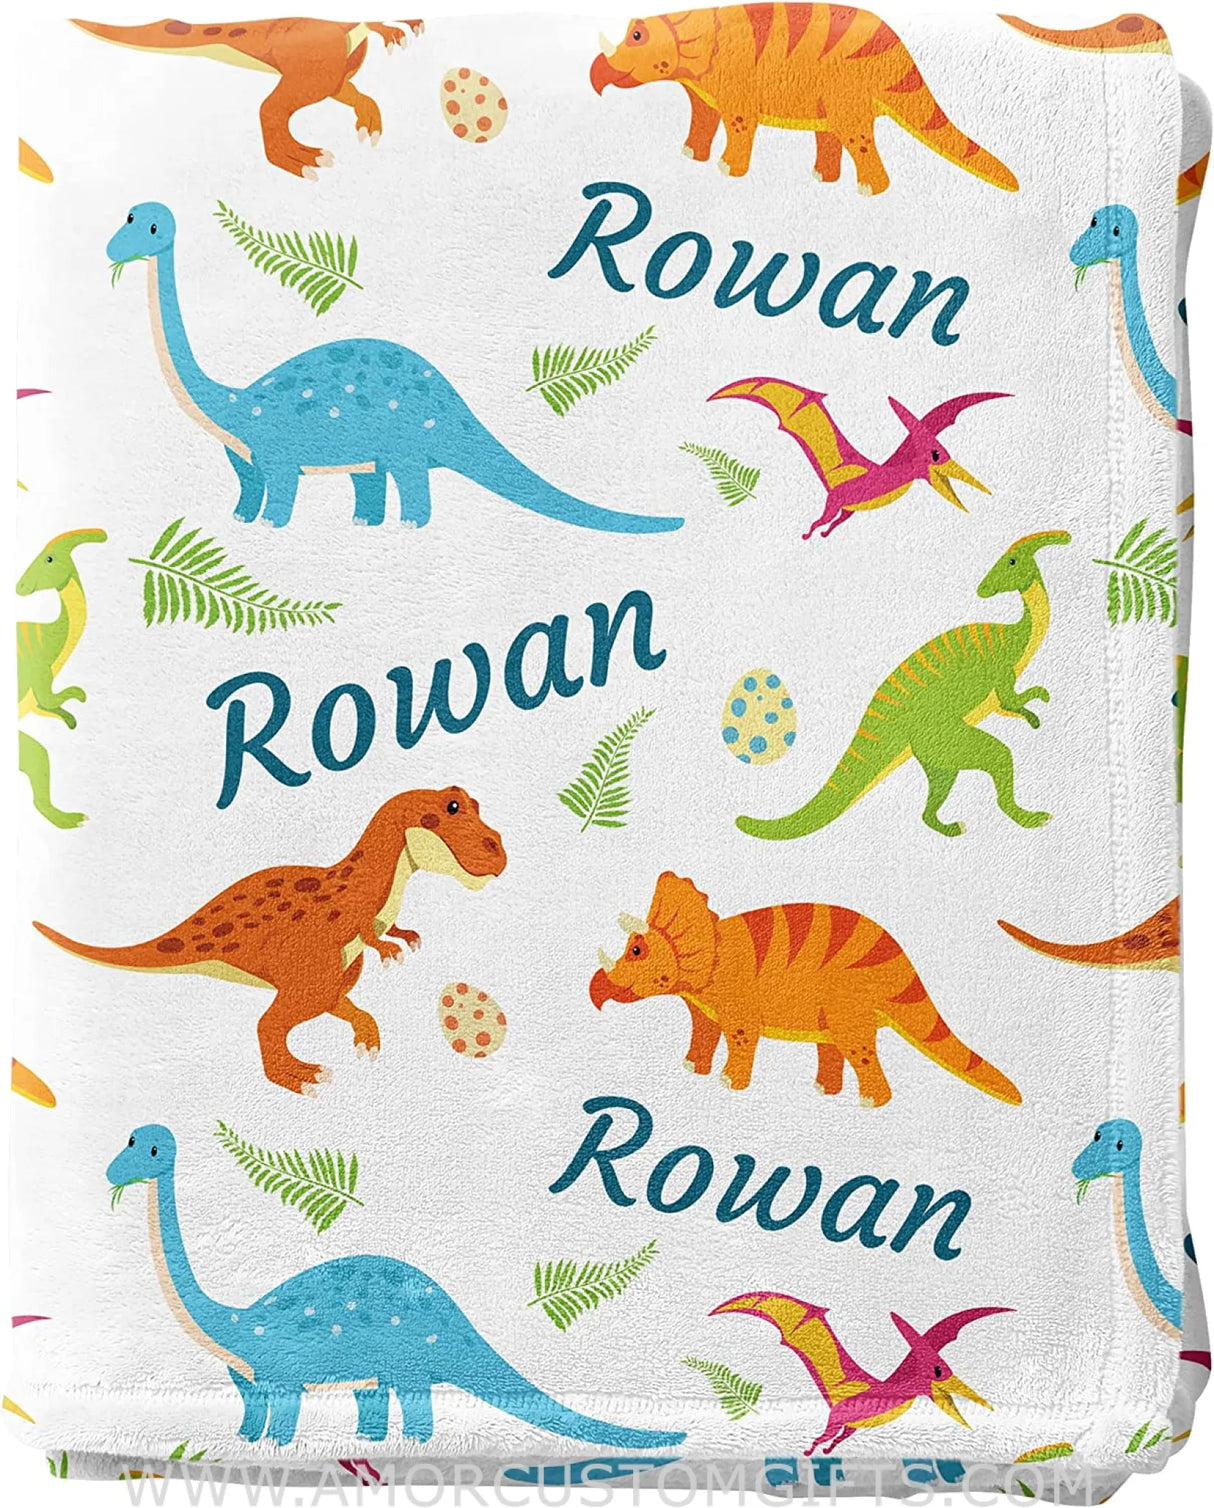 Blankets USA MADE Personalized Baby Blankets for Boys Dinosaurs, Blankets for Baby Shower, Birthday, Christmas, New Mom